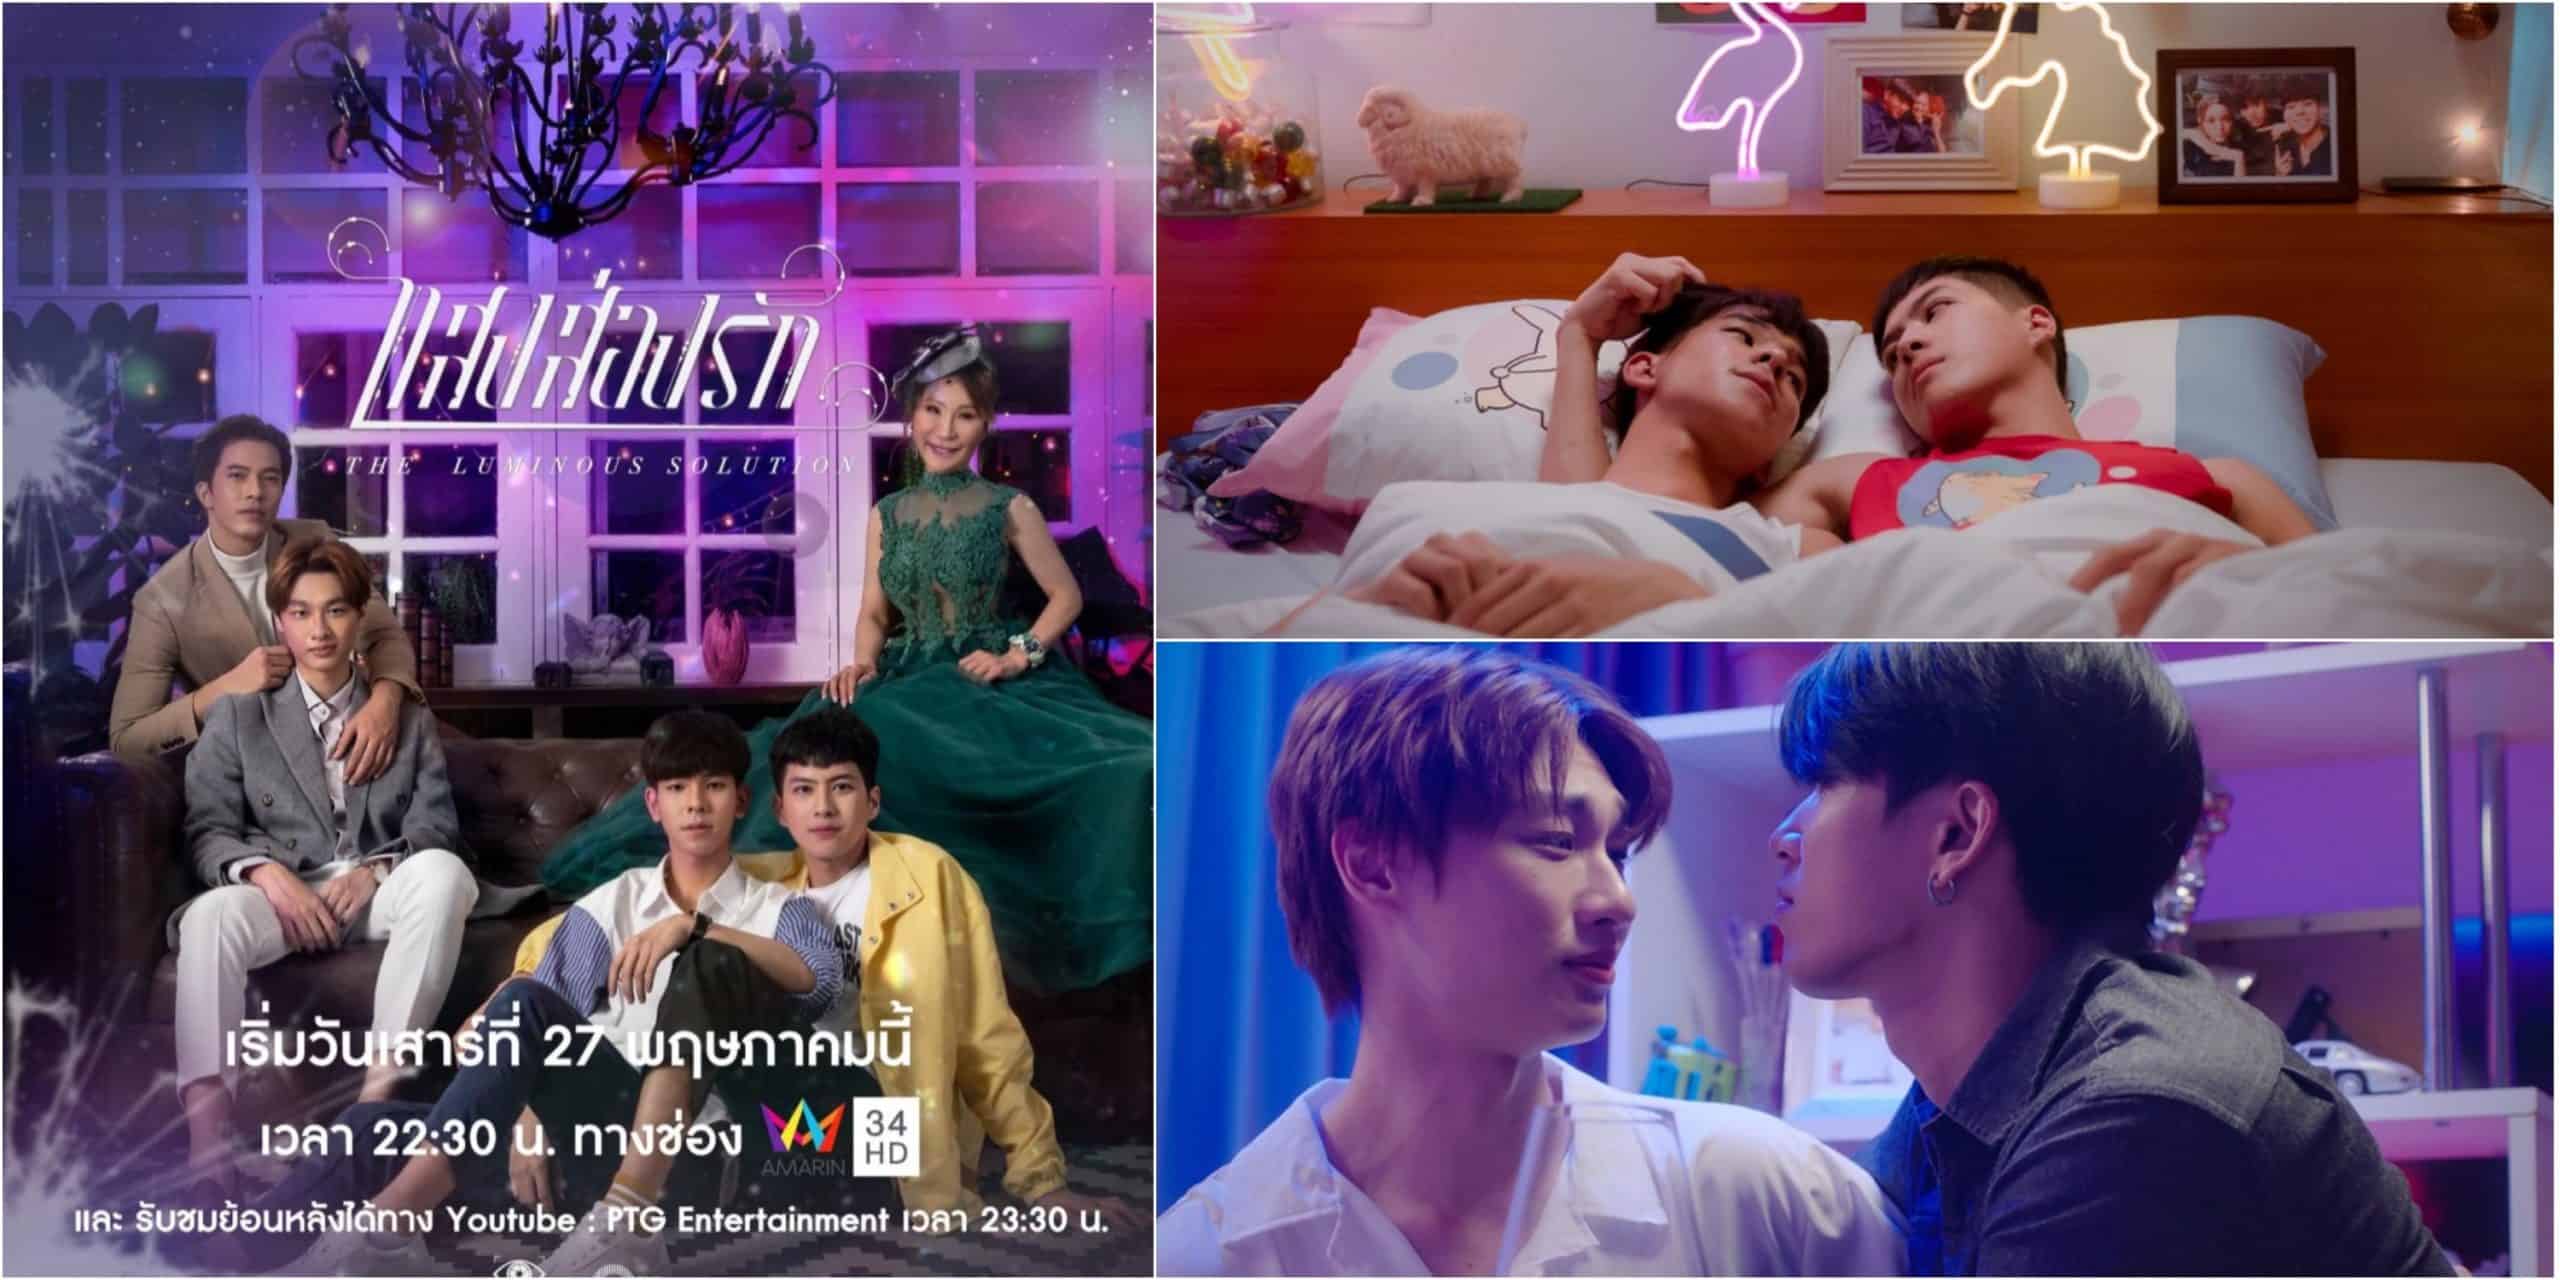 Thai BL Series The Luminous Solution Episode 6 Release Date